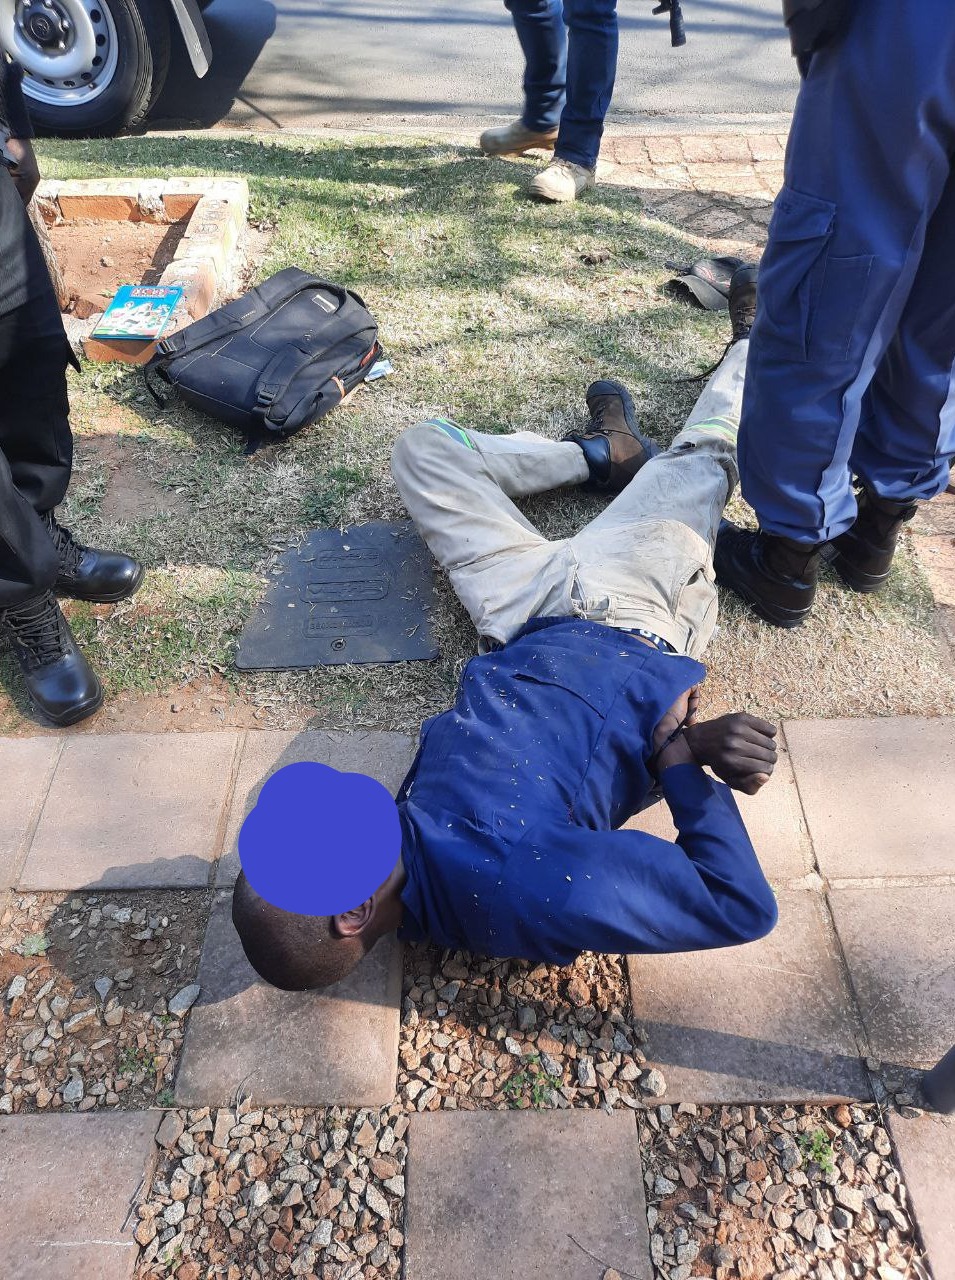 House robber arrested by SCP Security in Fairland